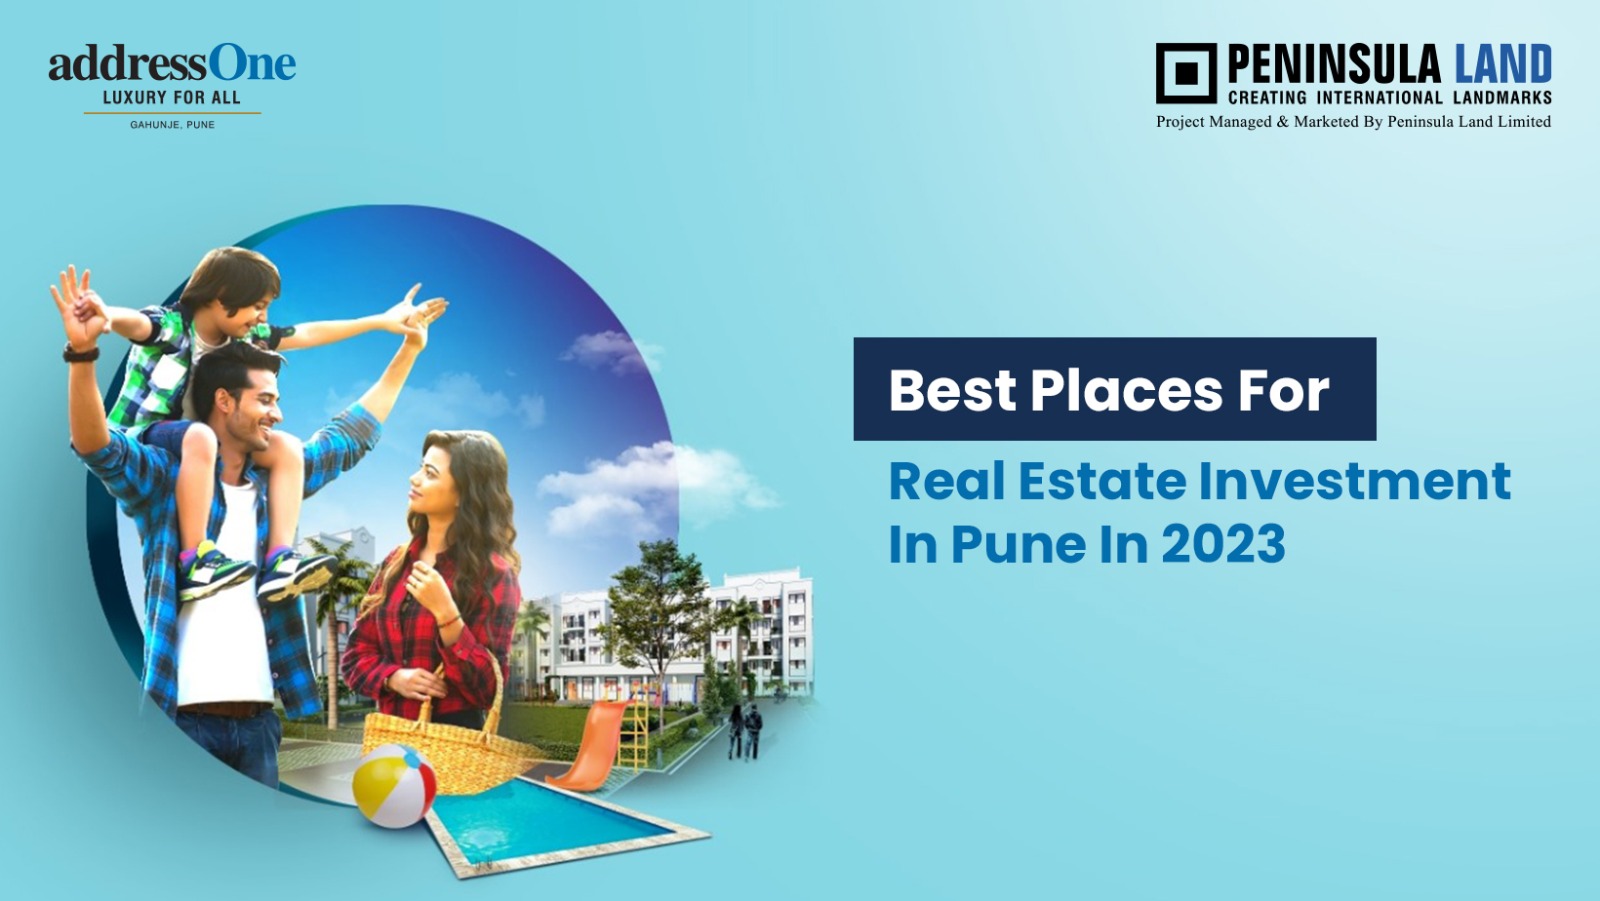 Real Estate Investments in Pune: Best Places